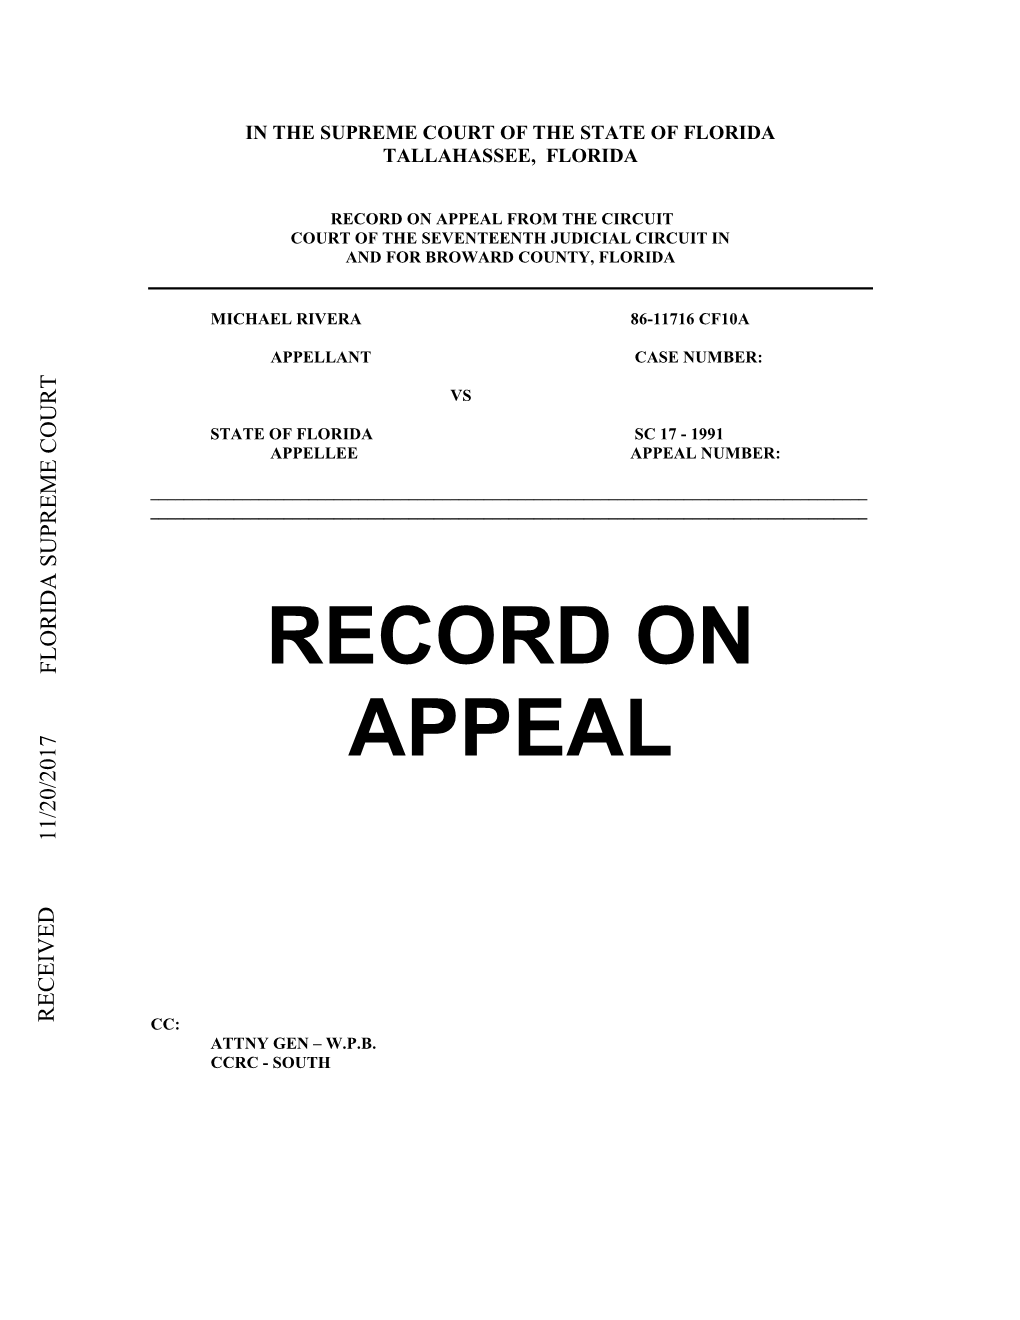 Record on Appeal from the Circuit Court of the Seventeenth Judicial Circuit in and for Broward County, Florida